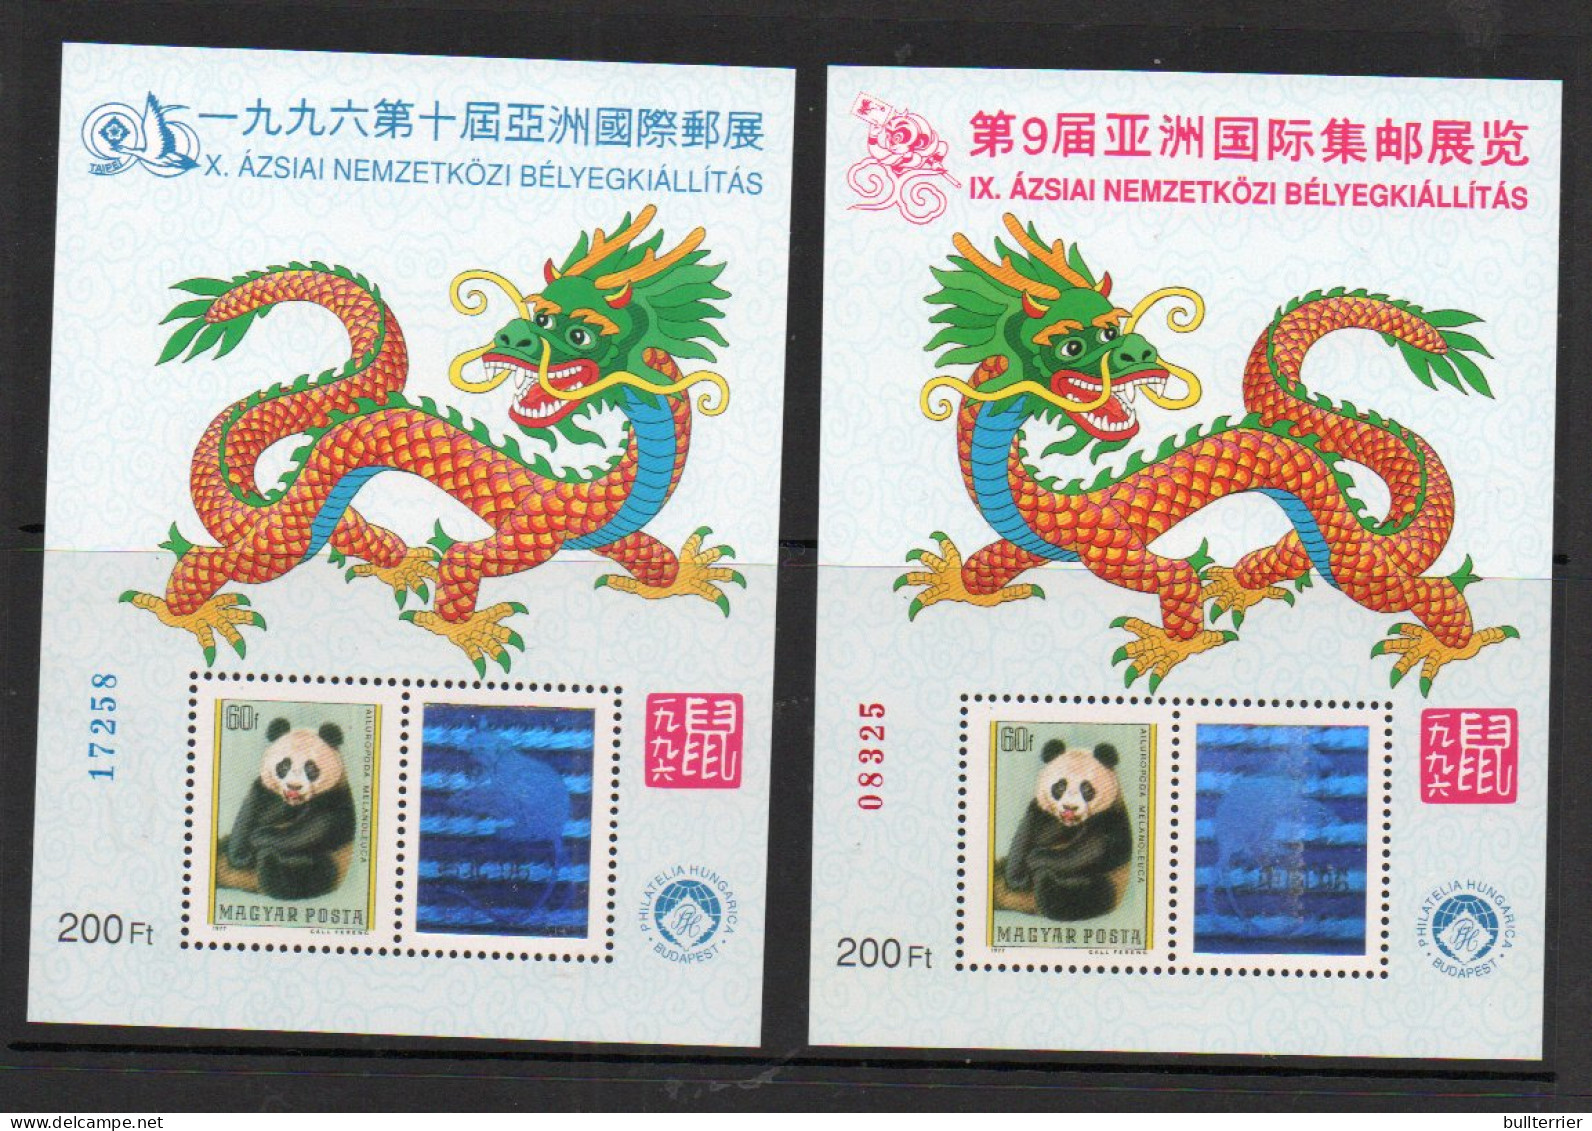 HOLOGRAMS - HUNGARY - TAIPEI /YEAR OF DRAGON /  HOLOGRAM S/SHEETS  MINT NEVER HINGED,  - Hologrammen